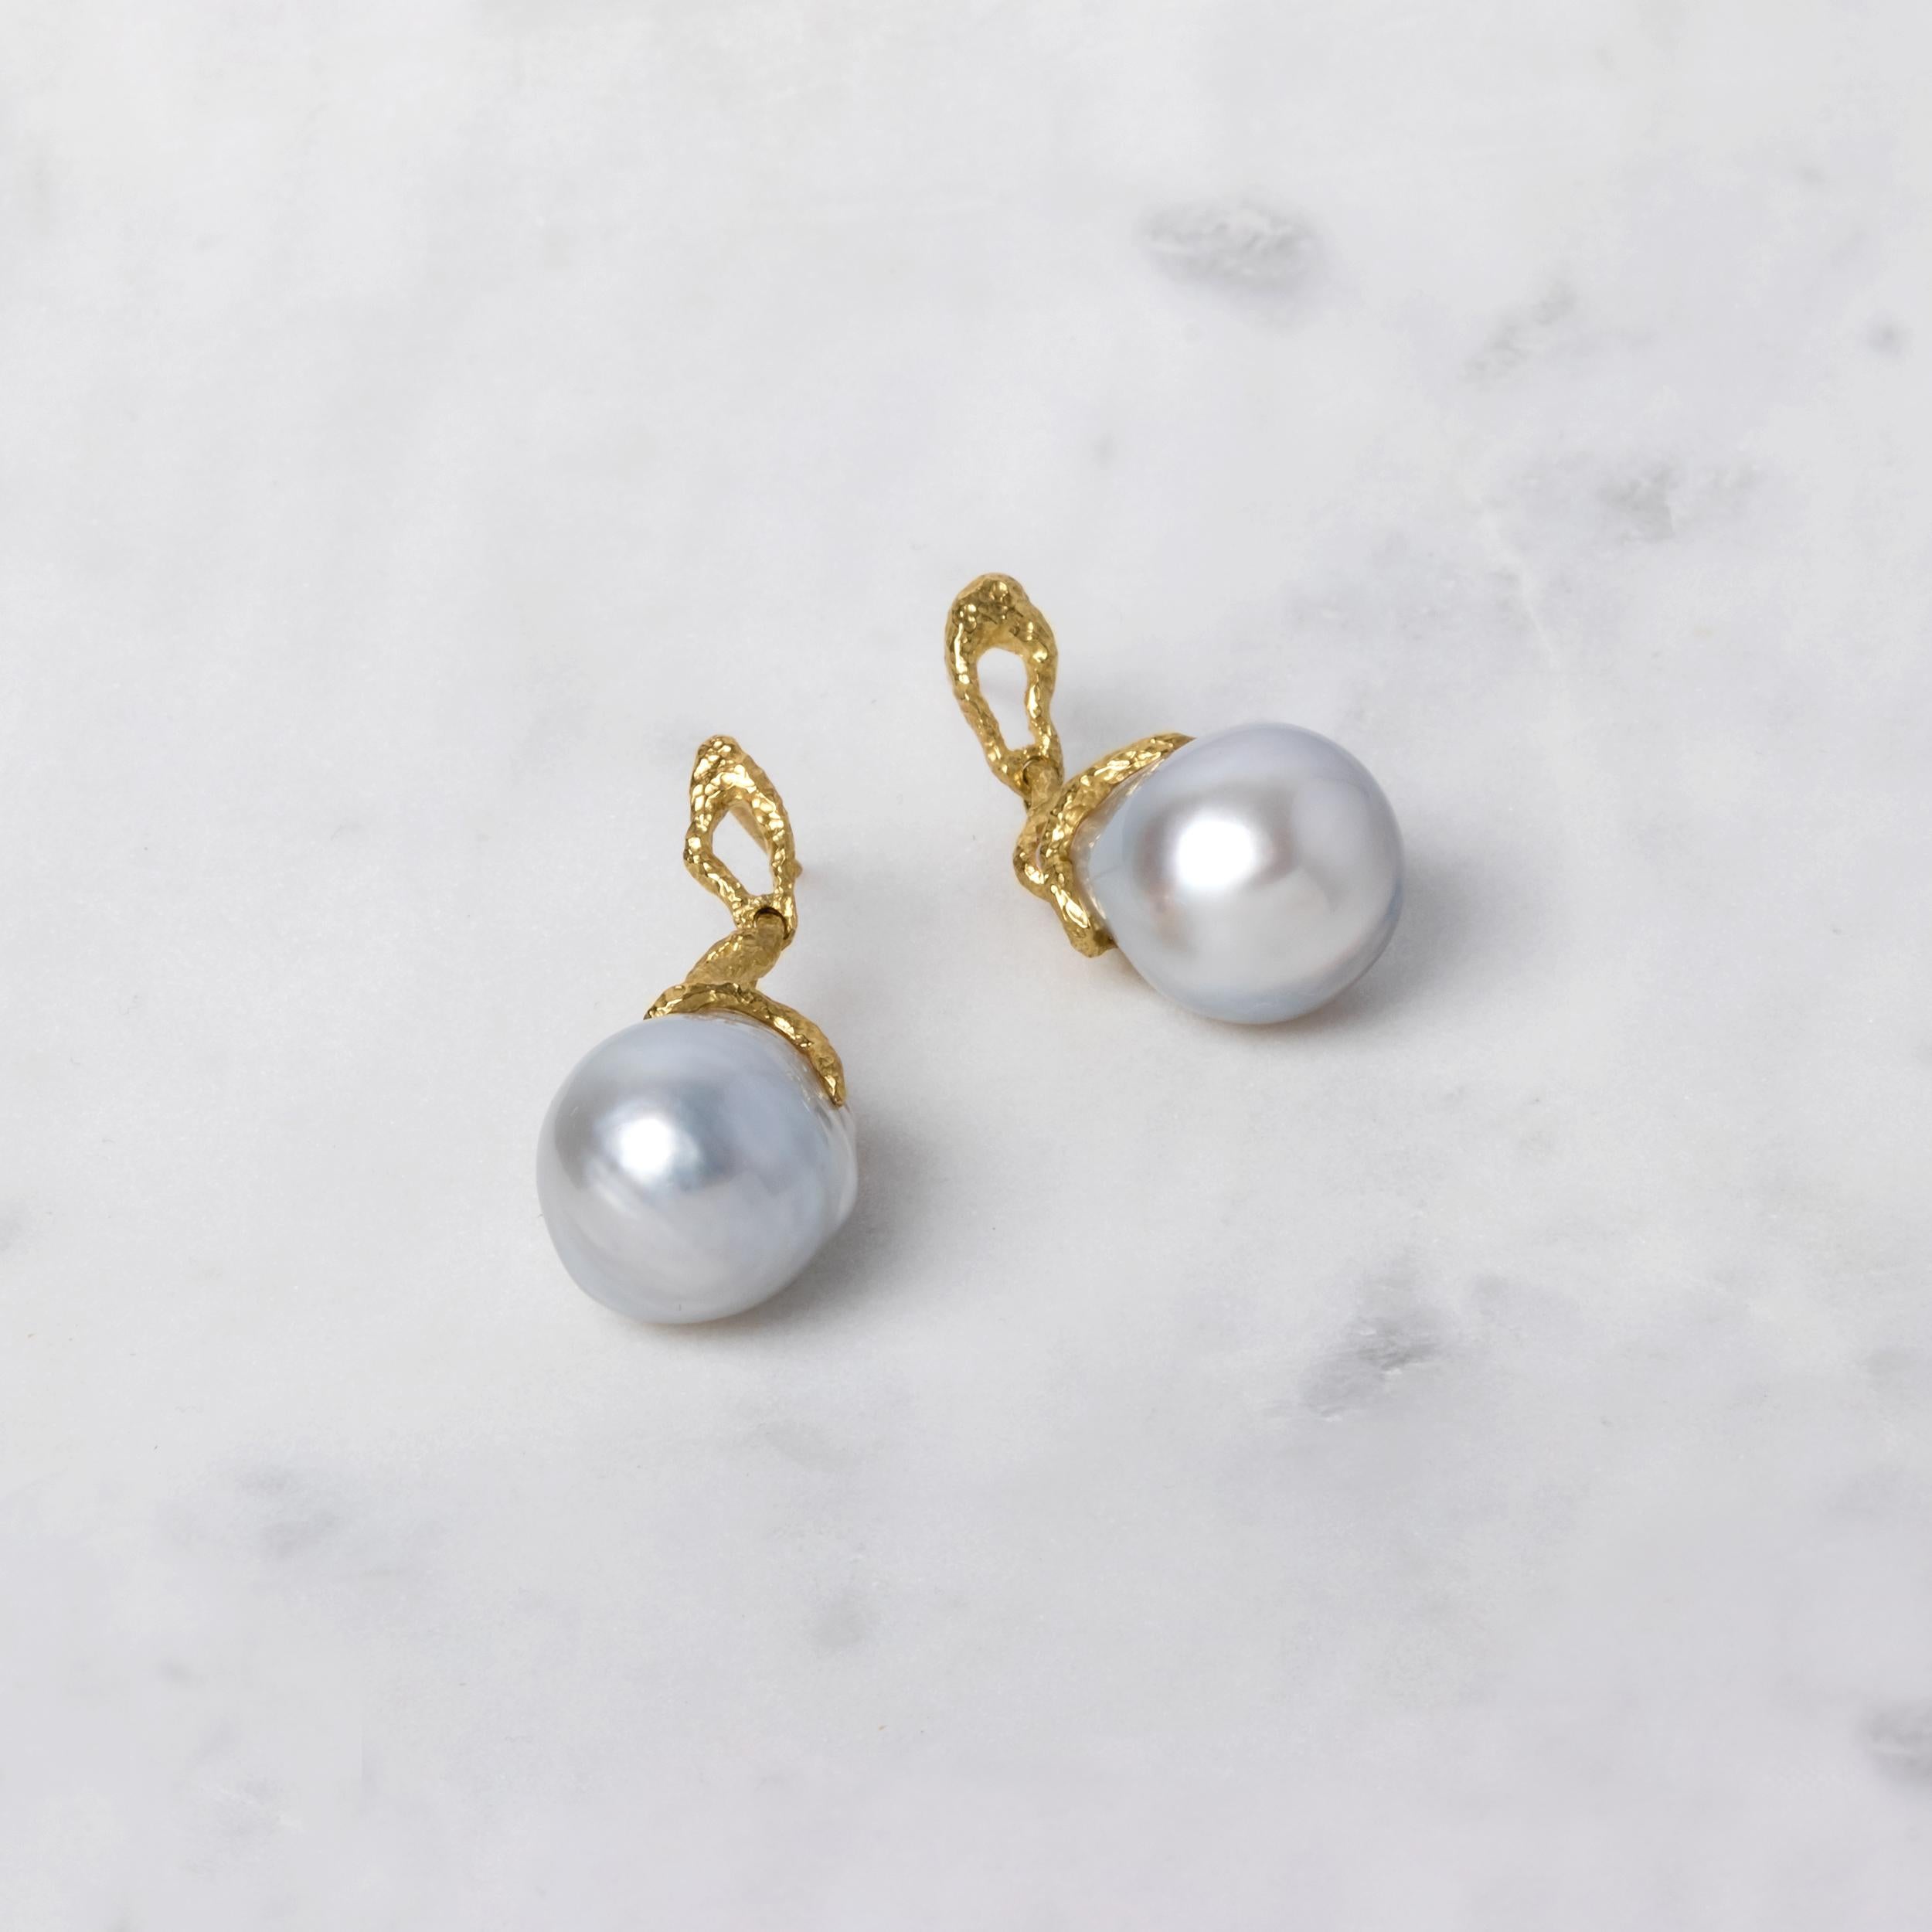 This one of a kind pair of earrings are from Lingjun's 'FISSURE' collection, featuring white Australian South Sea baroque pearls. 
IMPORTANT: Each pair of this design are made to order, due to baroque pearls' individual unique shapes, design and